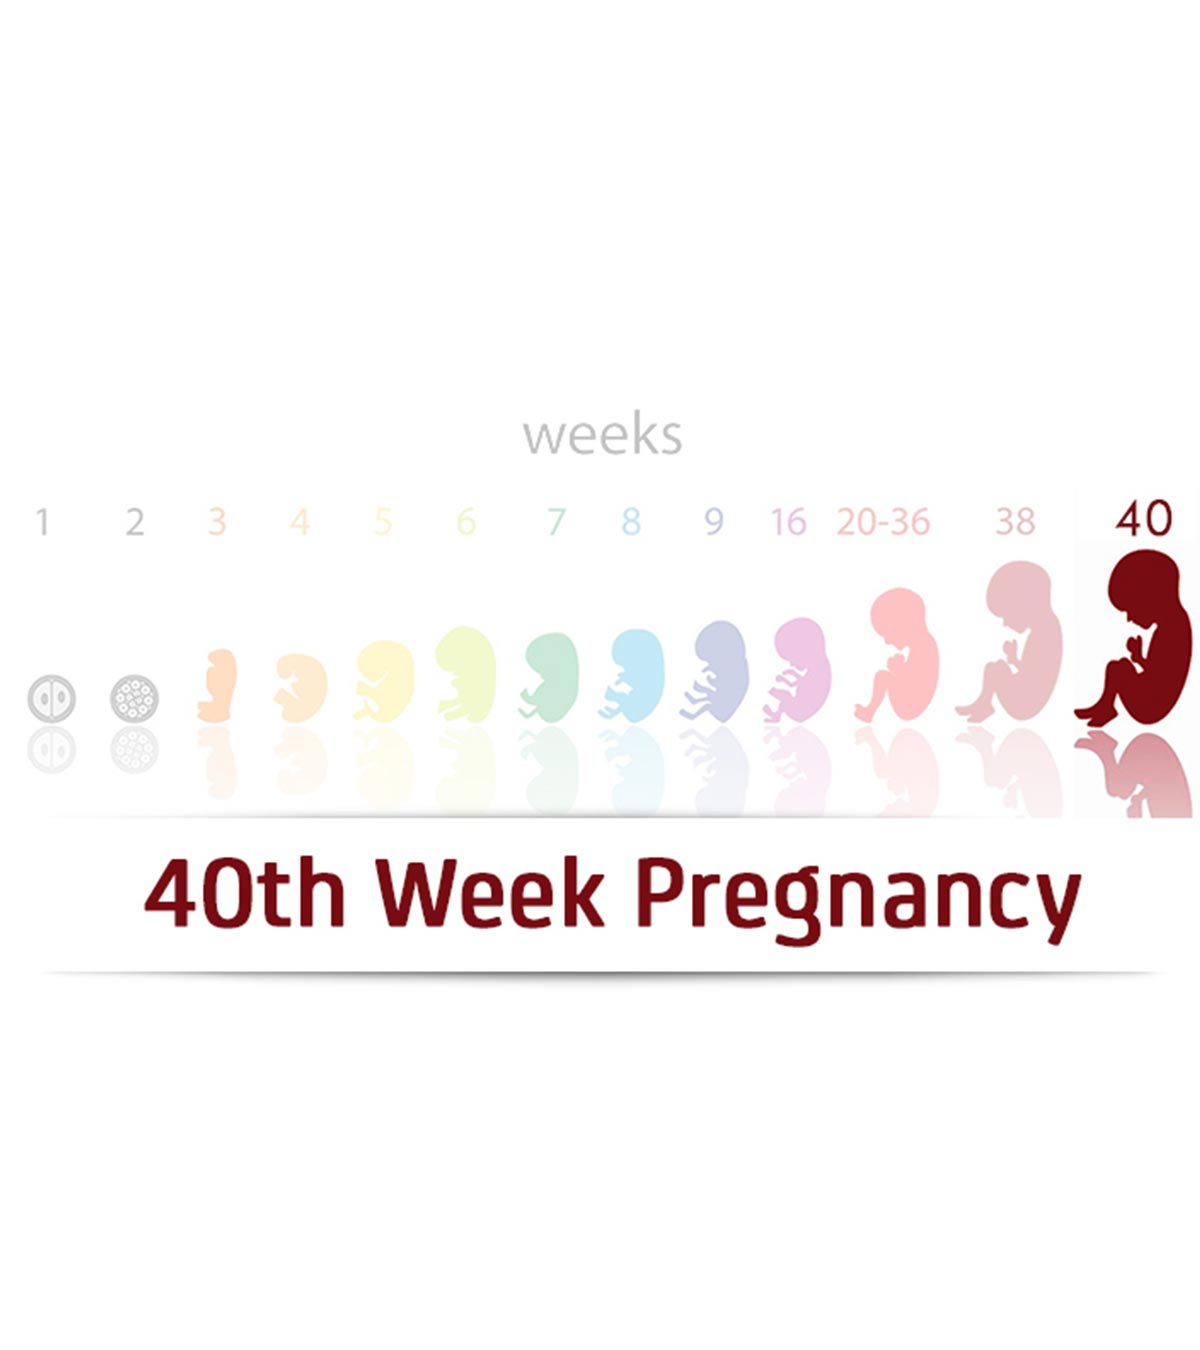 Baby growth on the 40th week of pregnancy